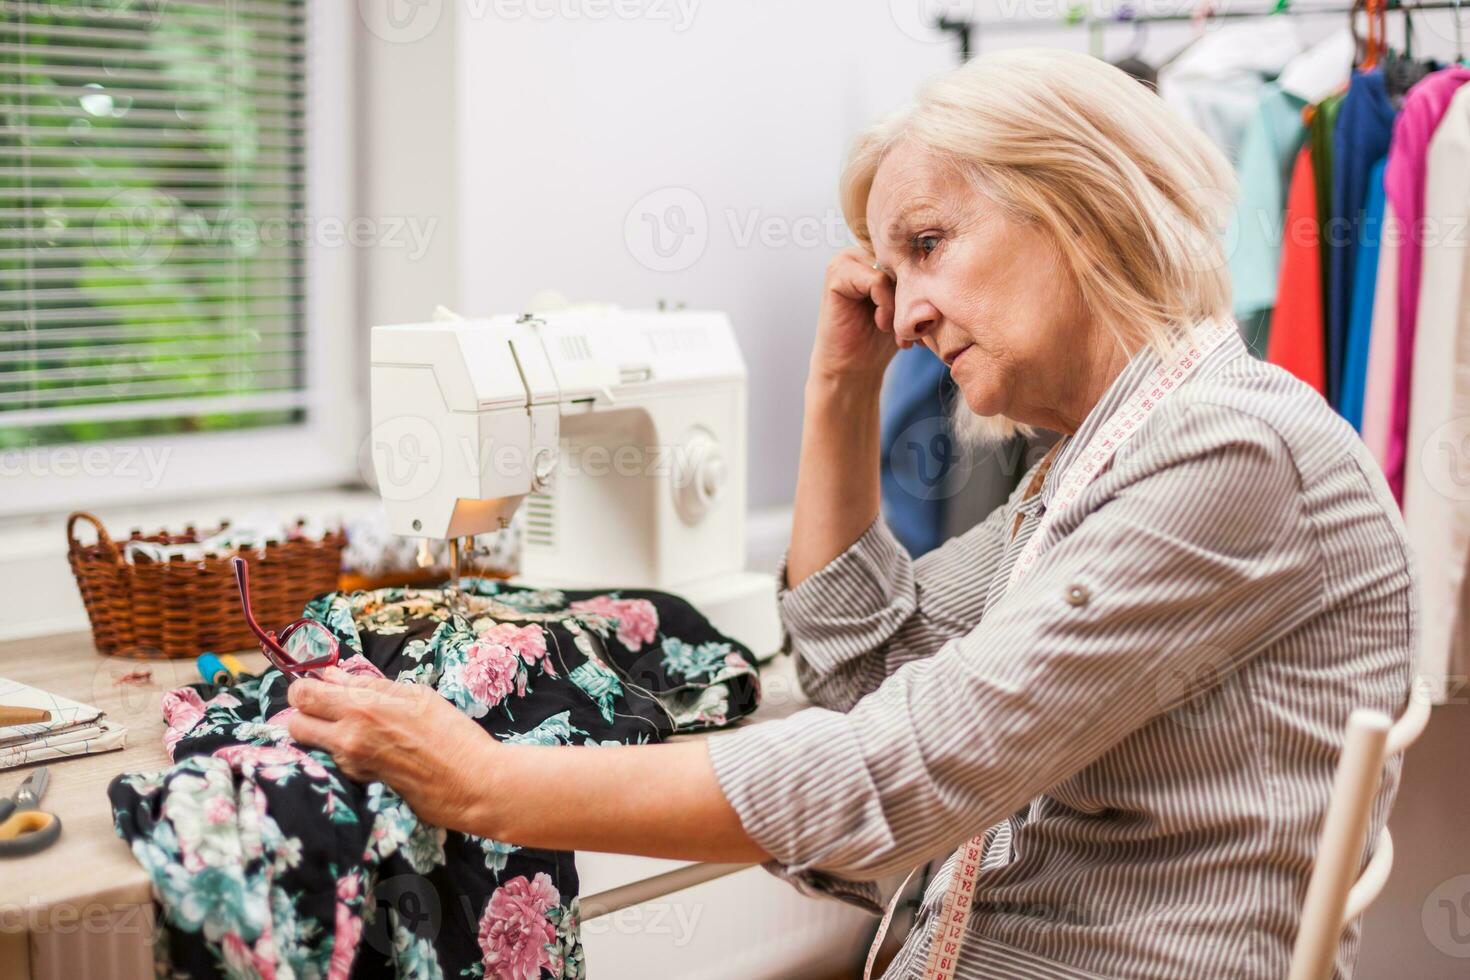 A woman tailoring photo